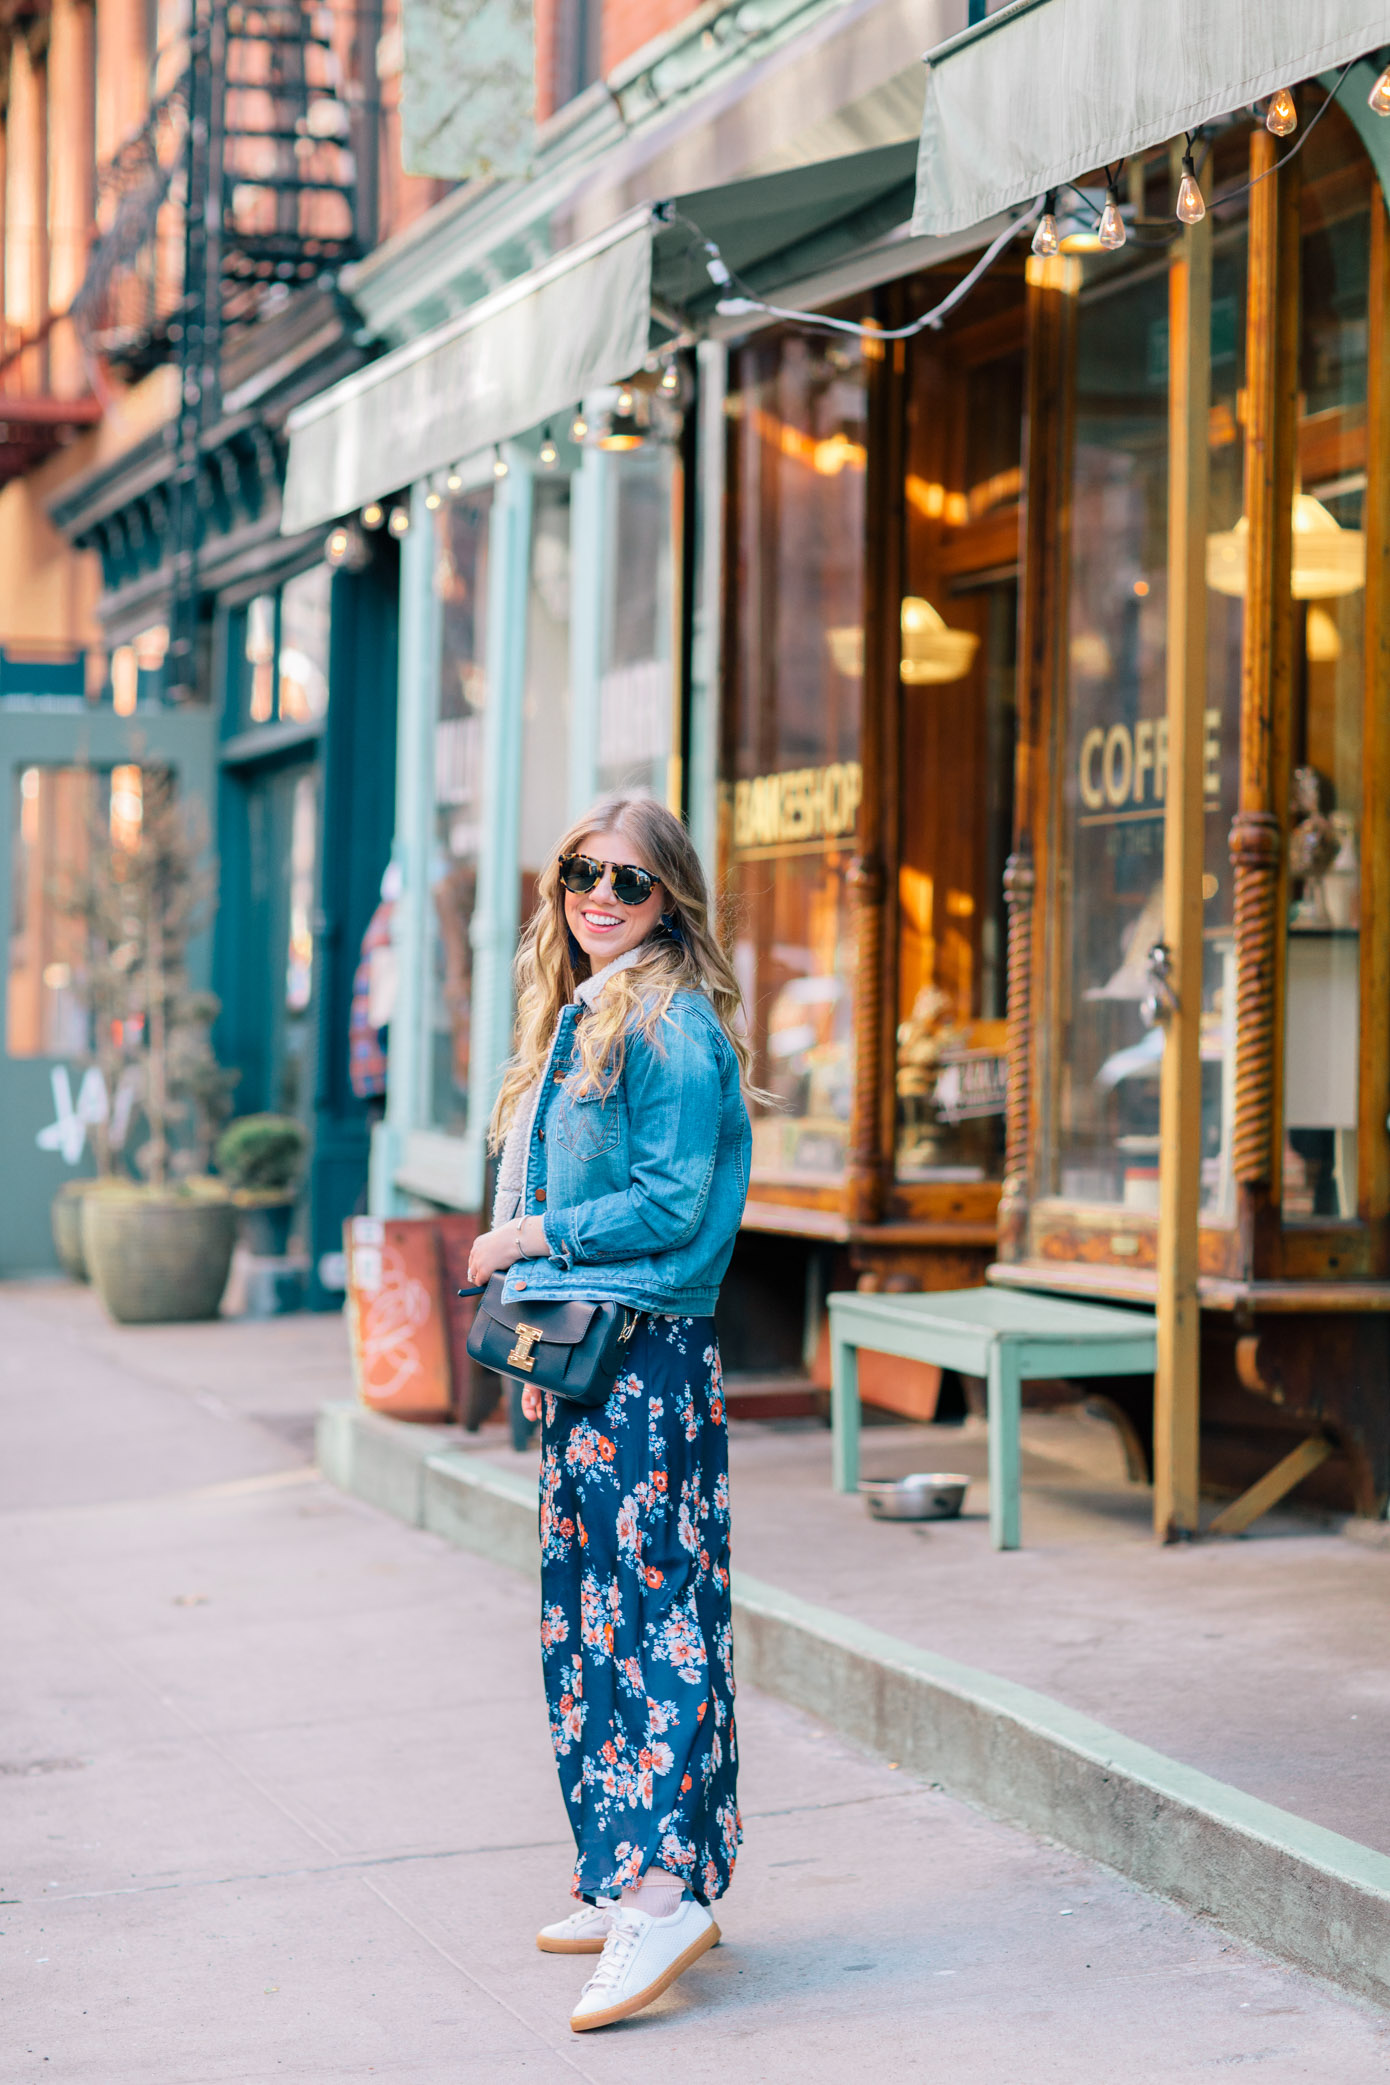 How to Wear Your Spring Dresses Now | Pairing a Maxi Dress with Sneakers | Louella Reese Life & Style Blog 